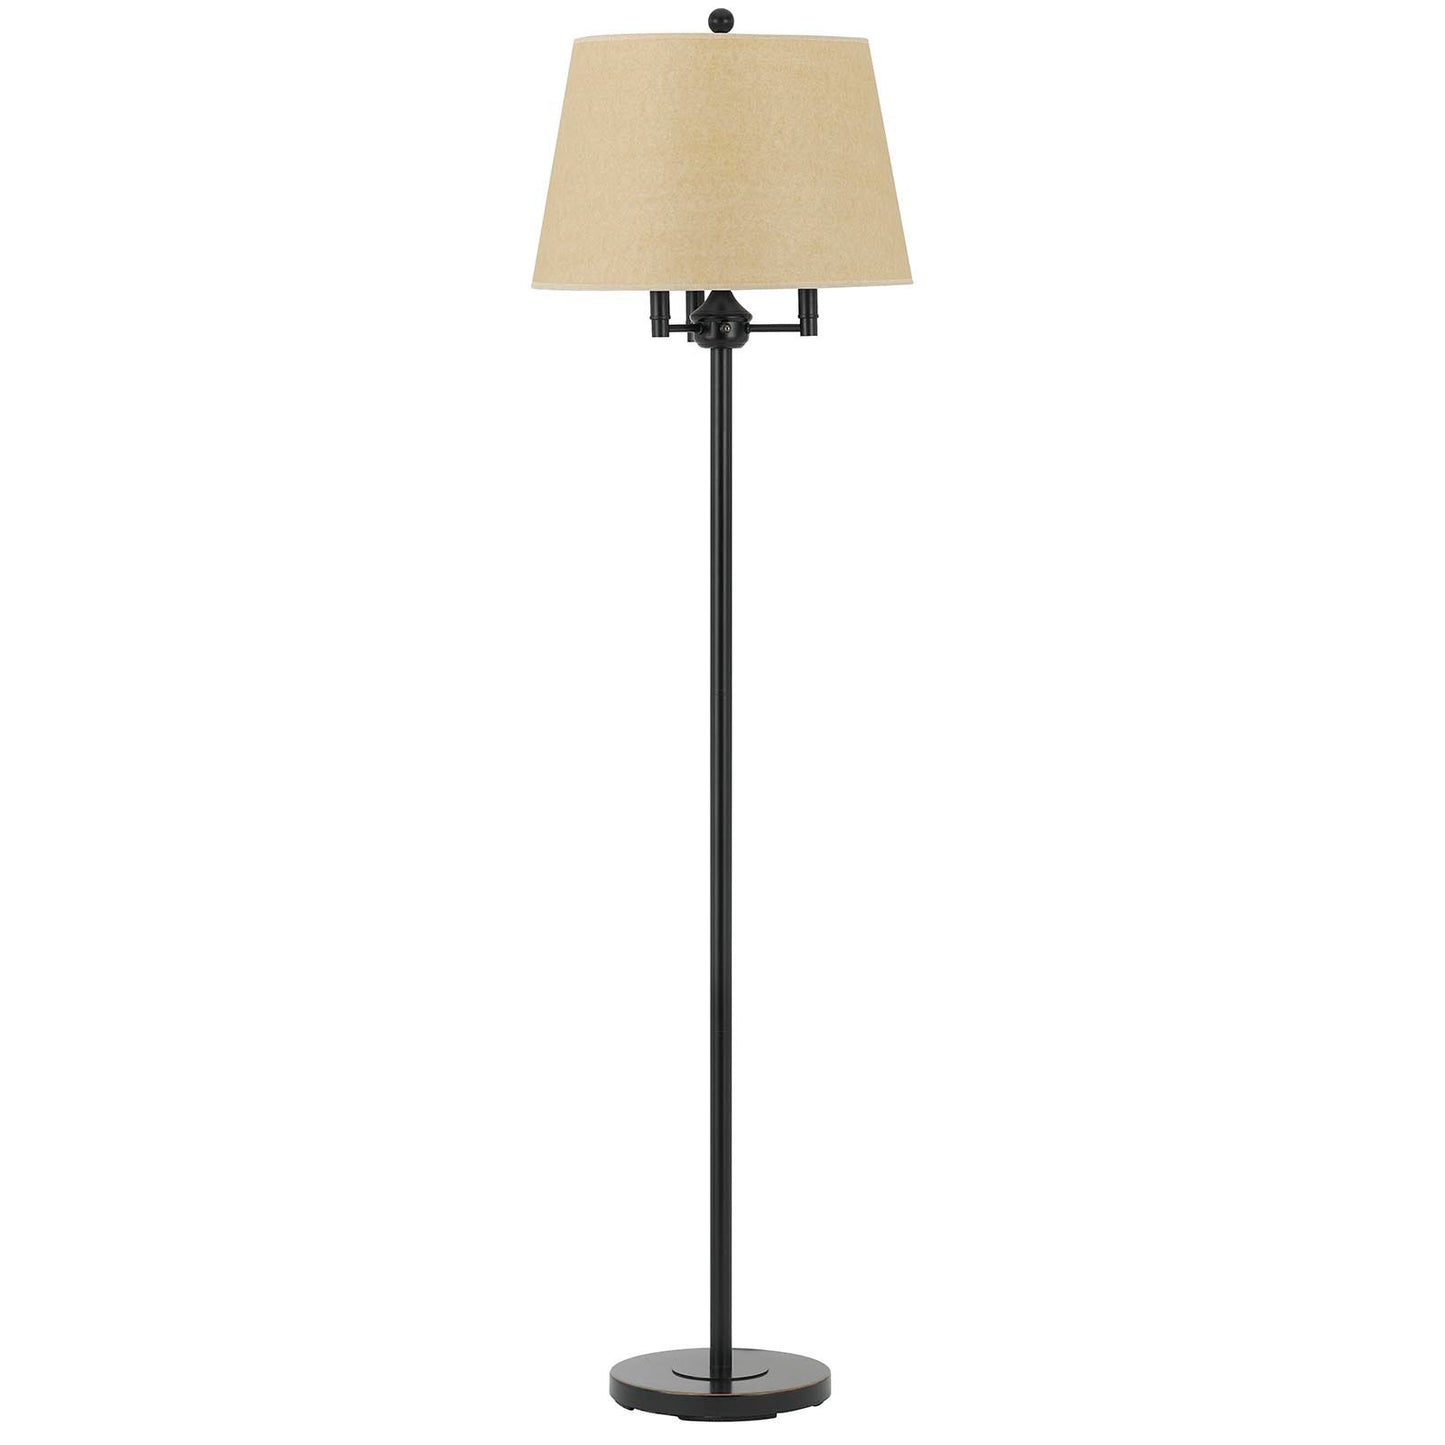 62" Bronze Four Light Traditional Shaped Floor Lamp With Beige Square Shade